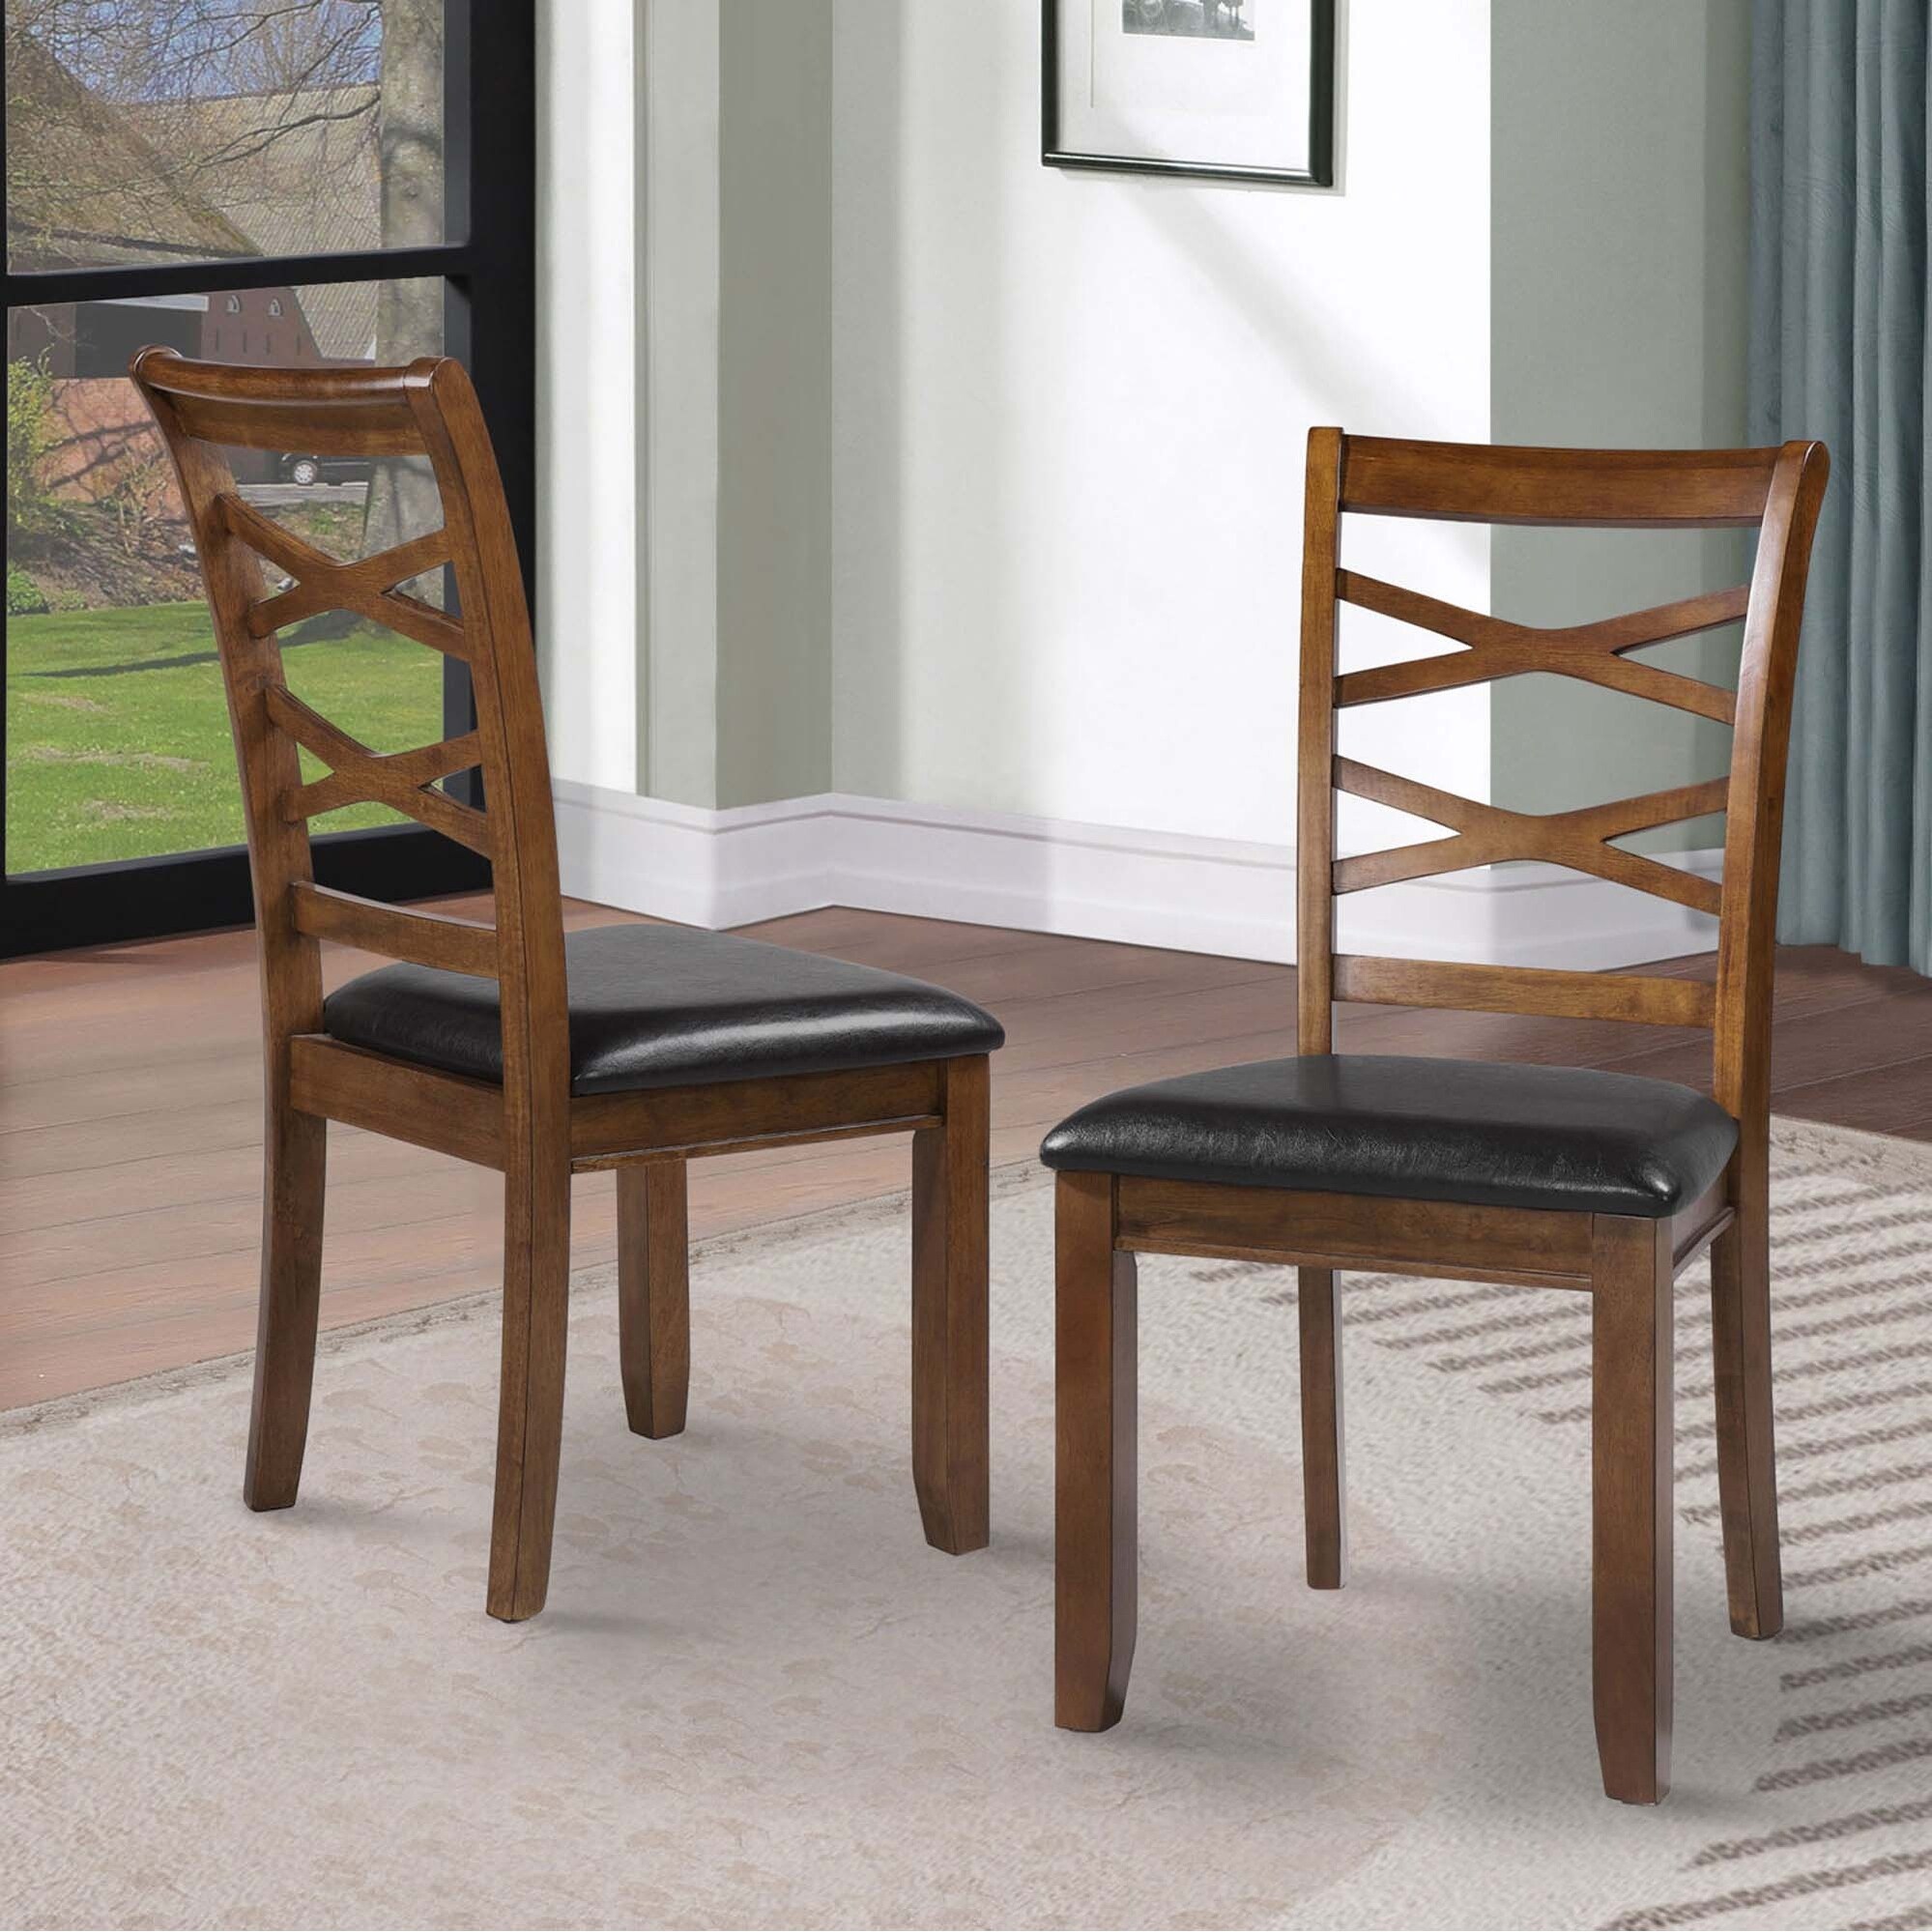 double chairs for living room